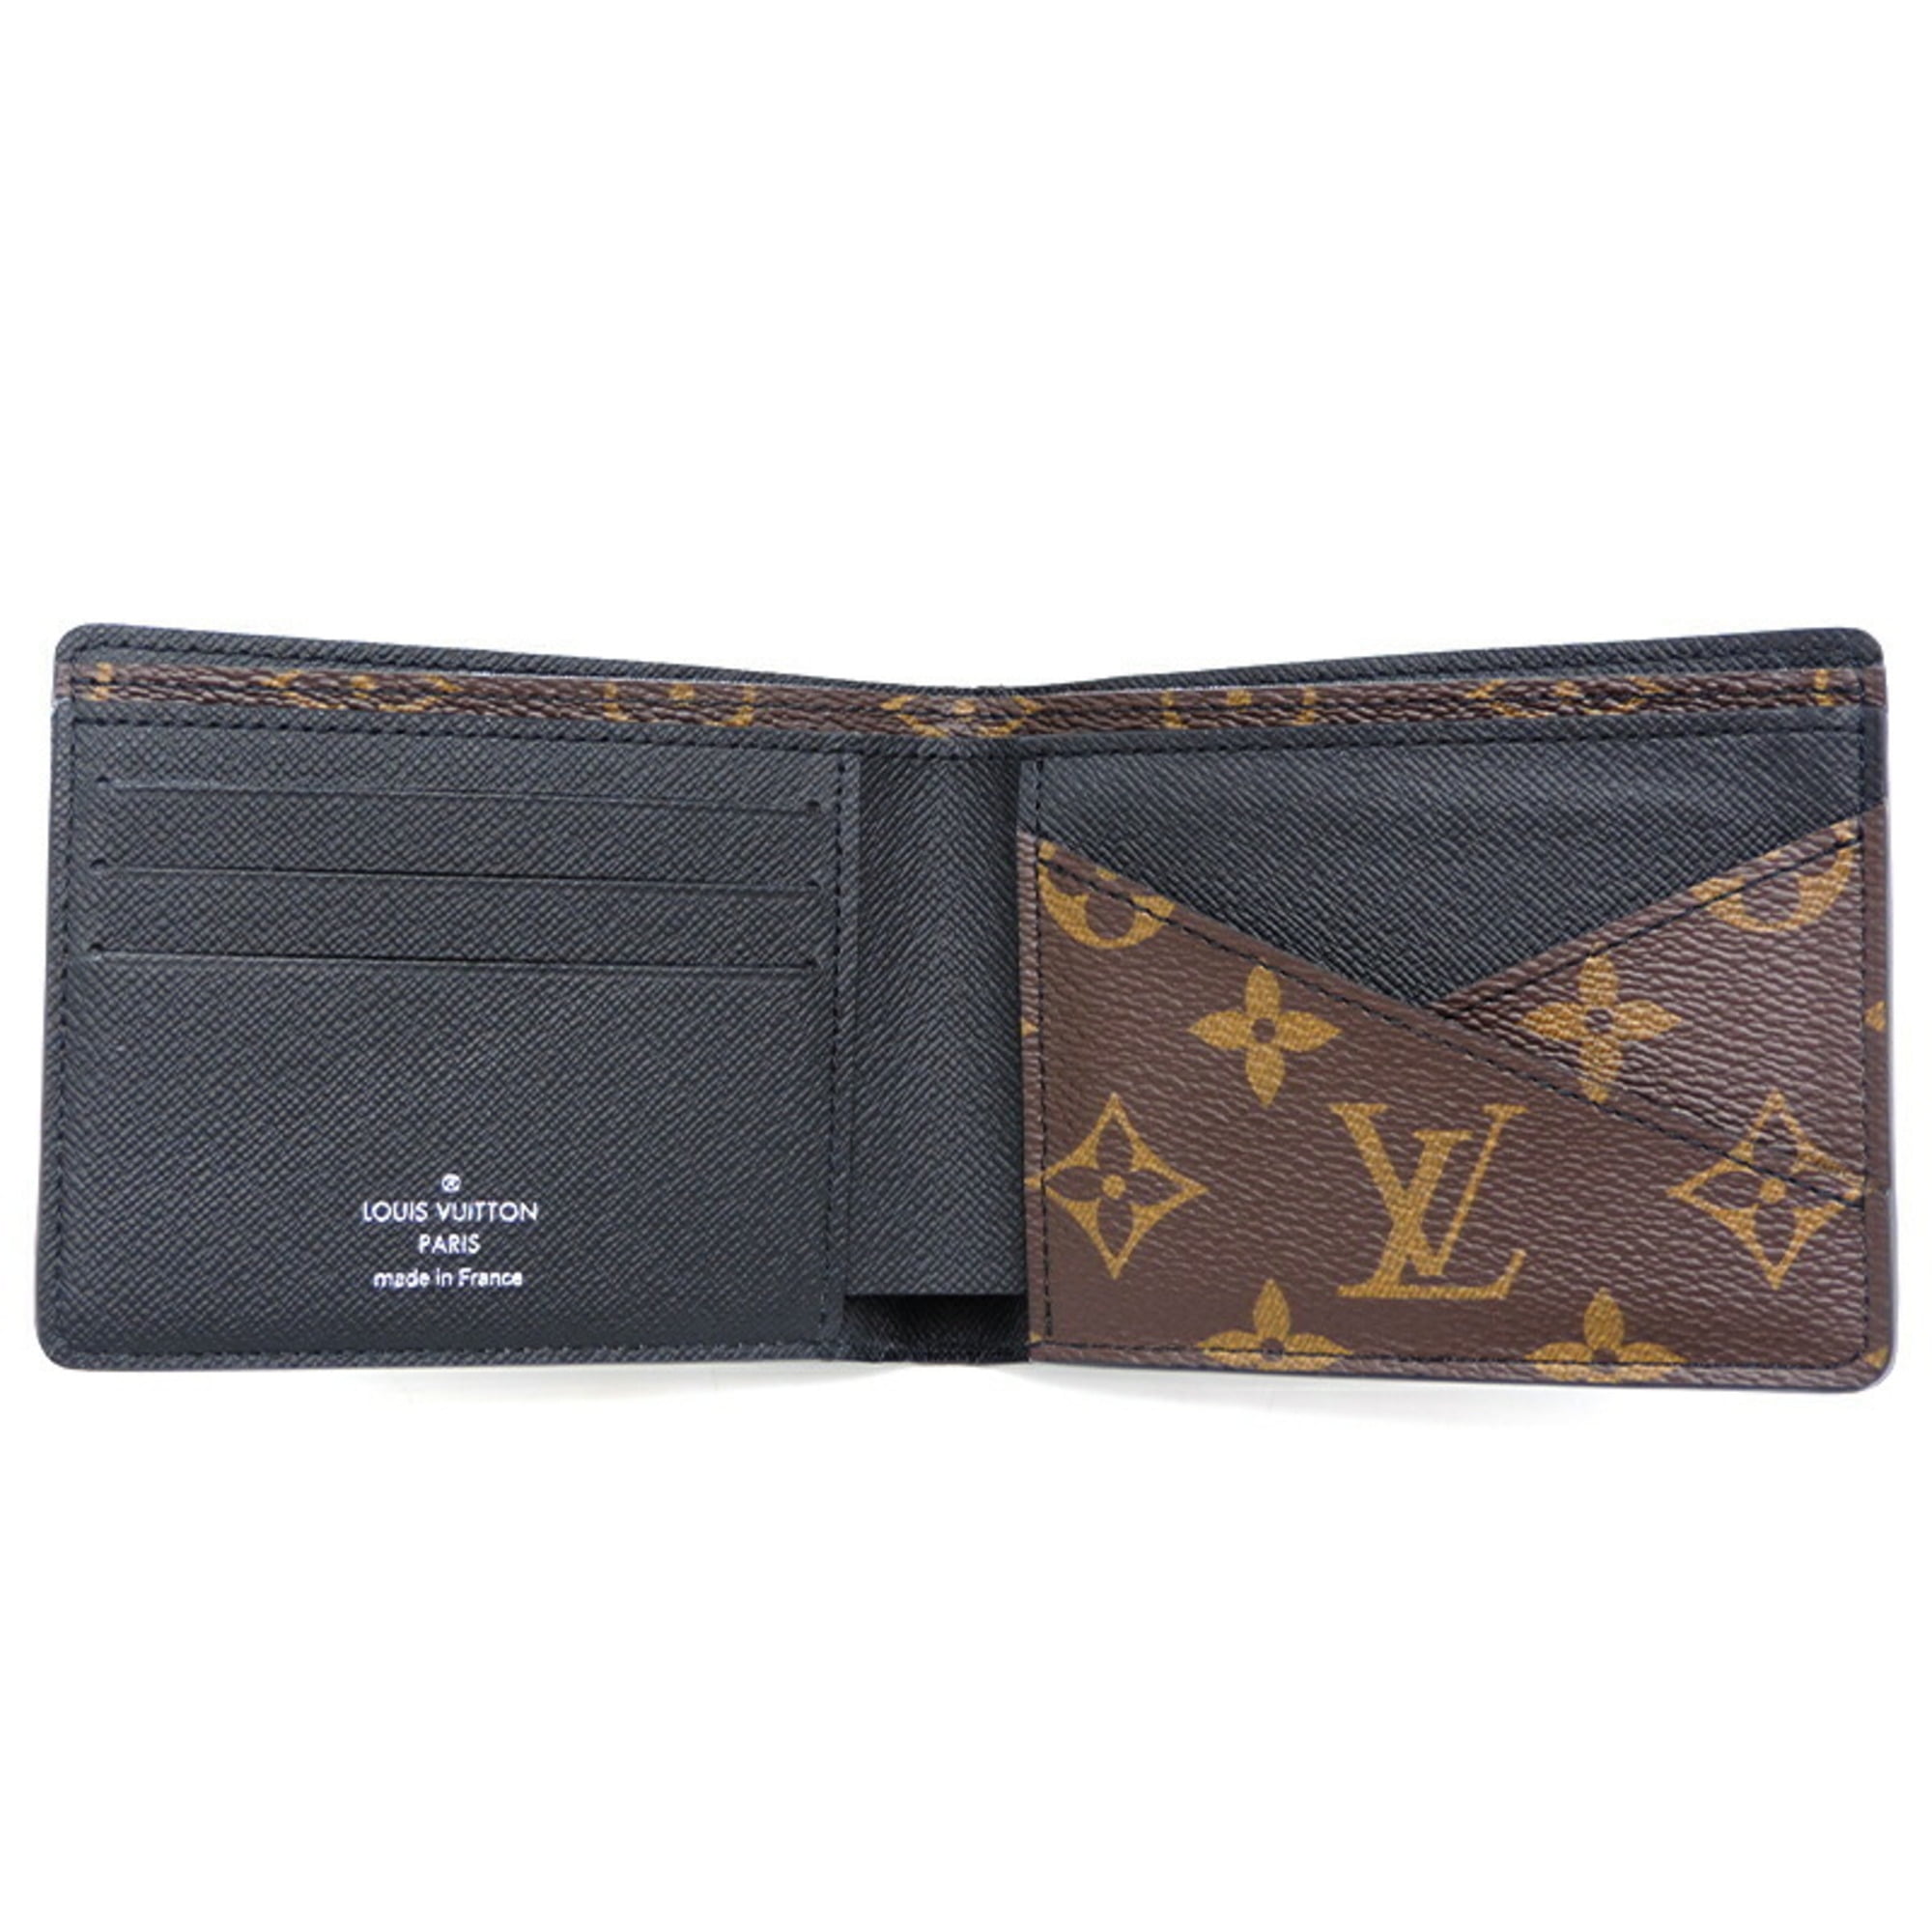 Buy Louis Vuitton monogram LOUIS VUITTON Portefeuille Marco M61675 Bifold  Wallet Brown / 083098 [Used] from Japan - Buy authentic Plus exclusive  items from Japan